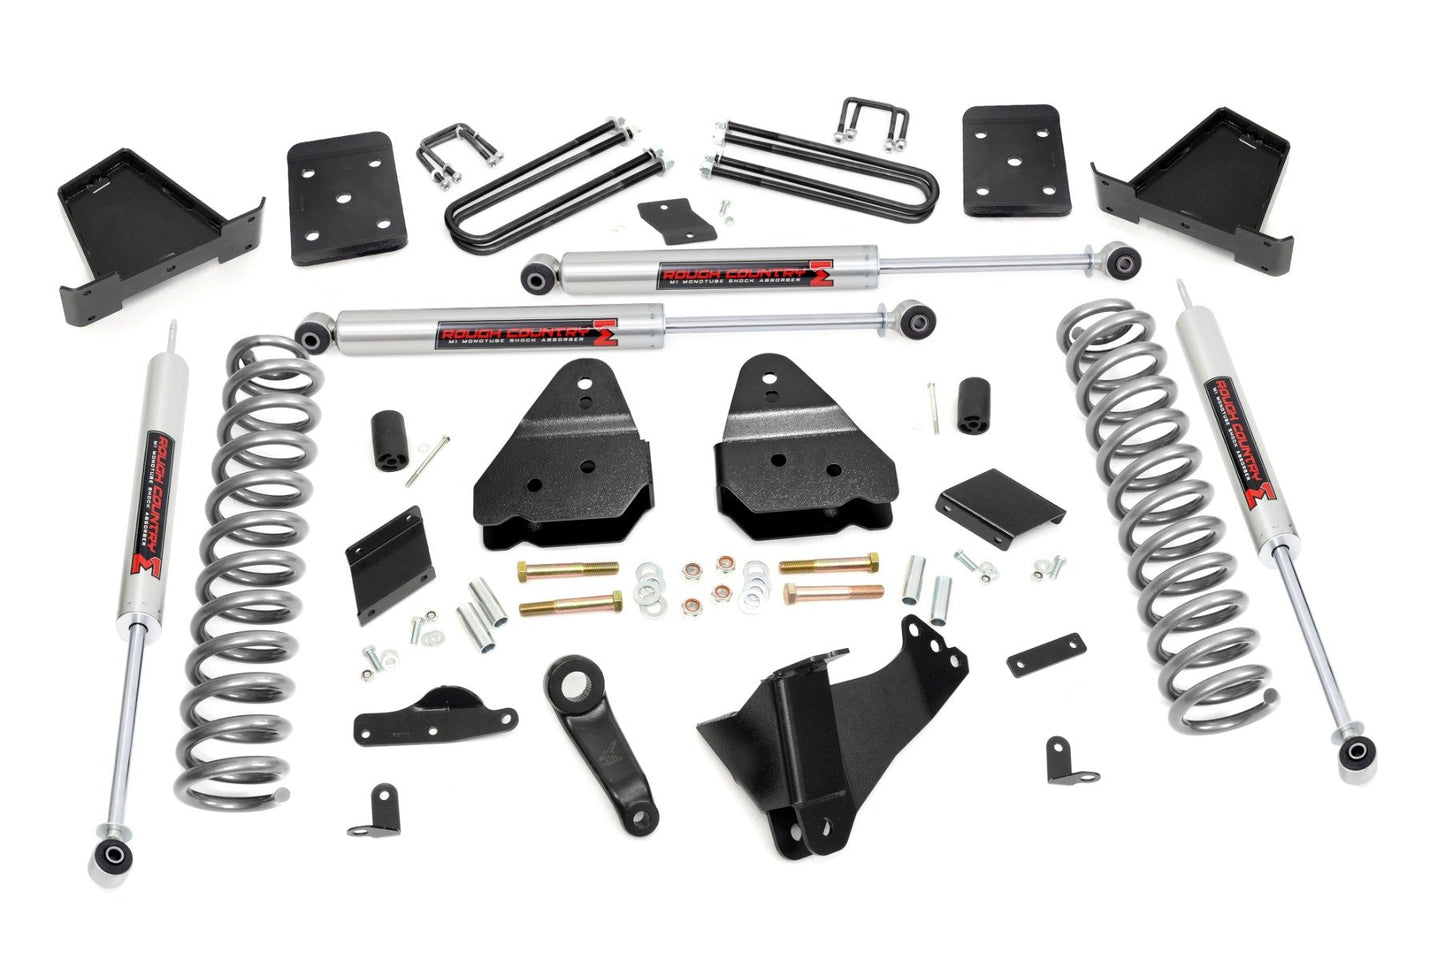 Rough Country (56740) 4.5 Inch Lift Kit | OVLD | M1 | Ford F-250 Super Duty 4WD (2015-2016)